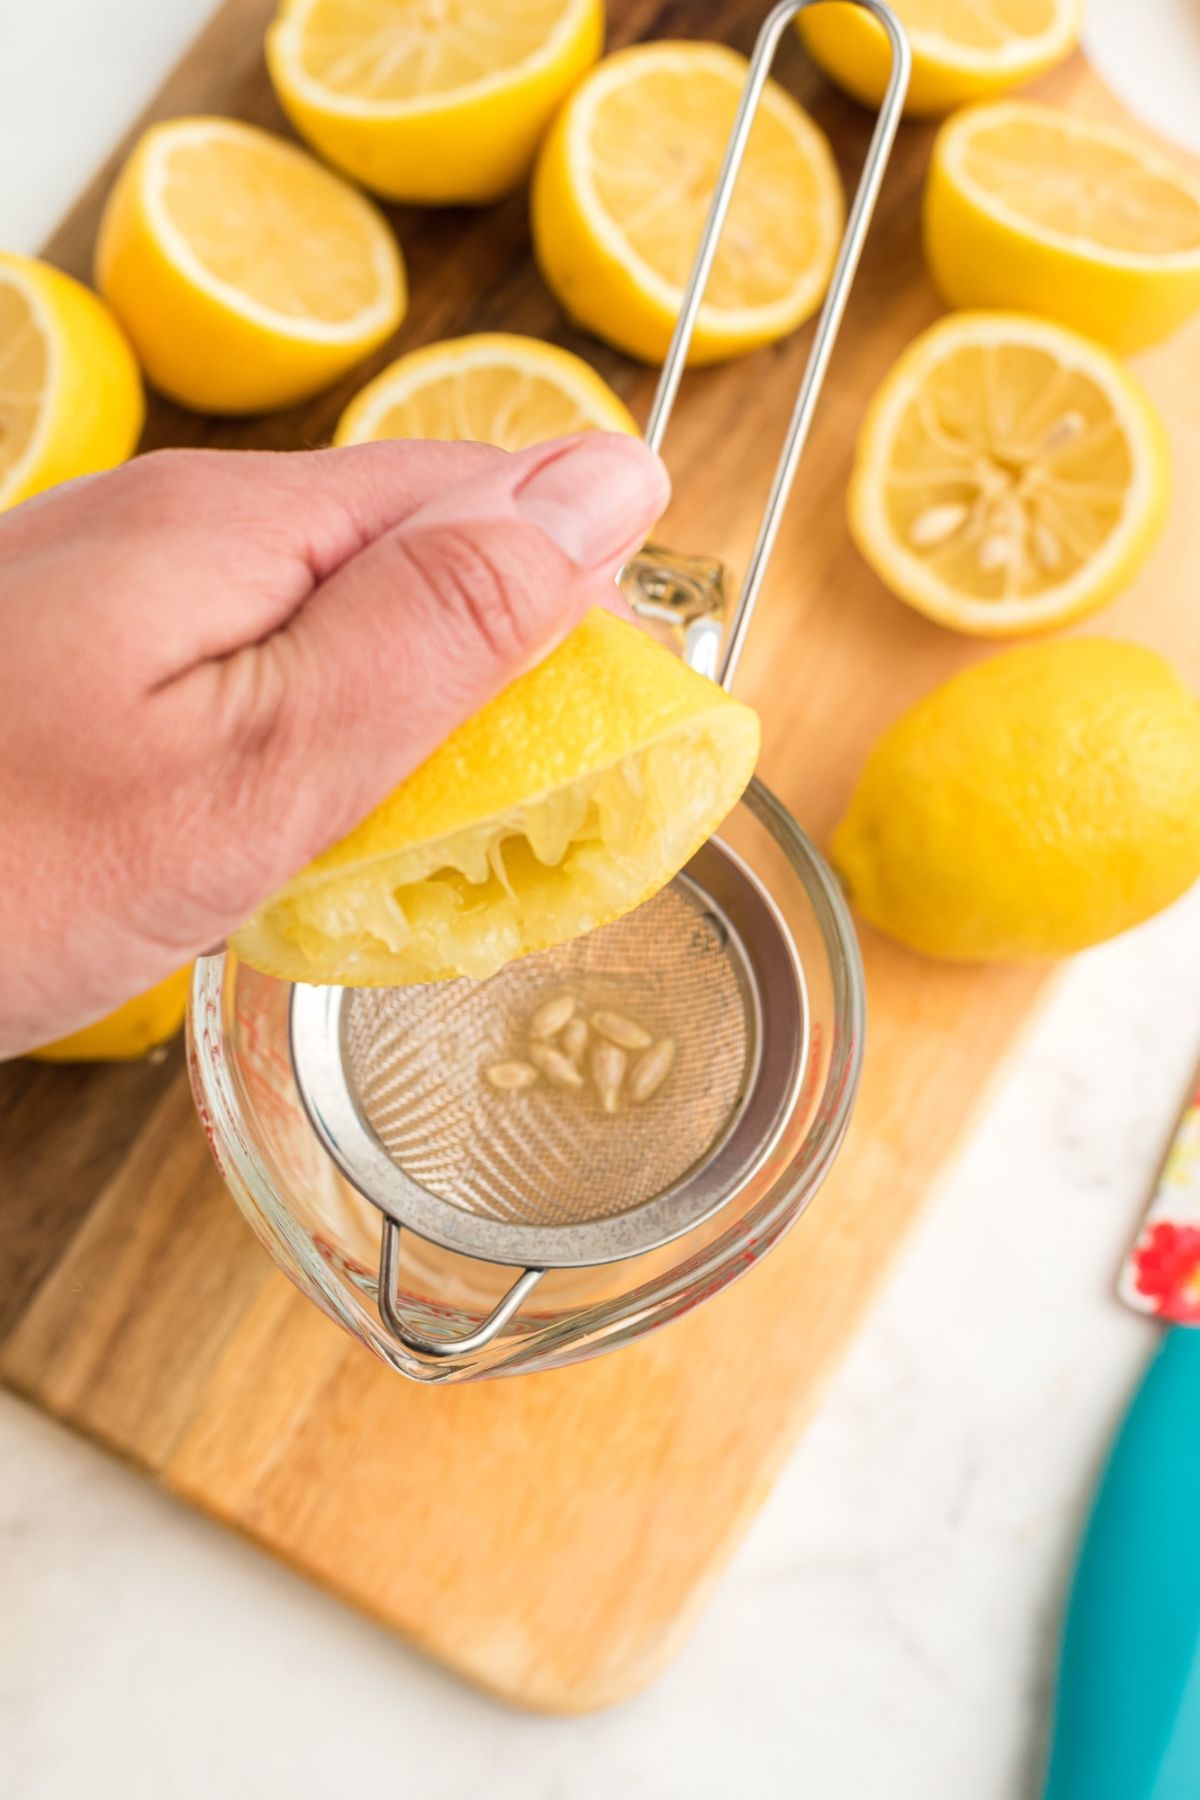 hand squeezing lemon into glass measuring cup with strainer catching seeds